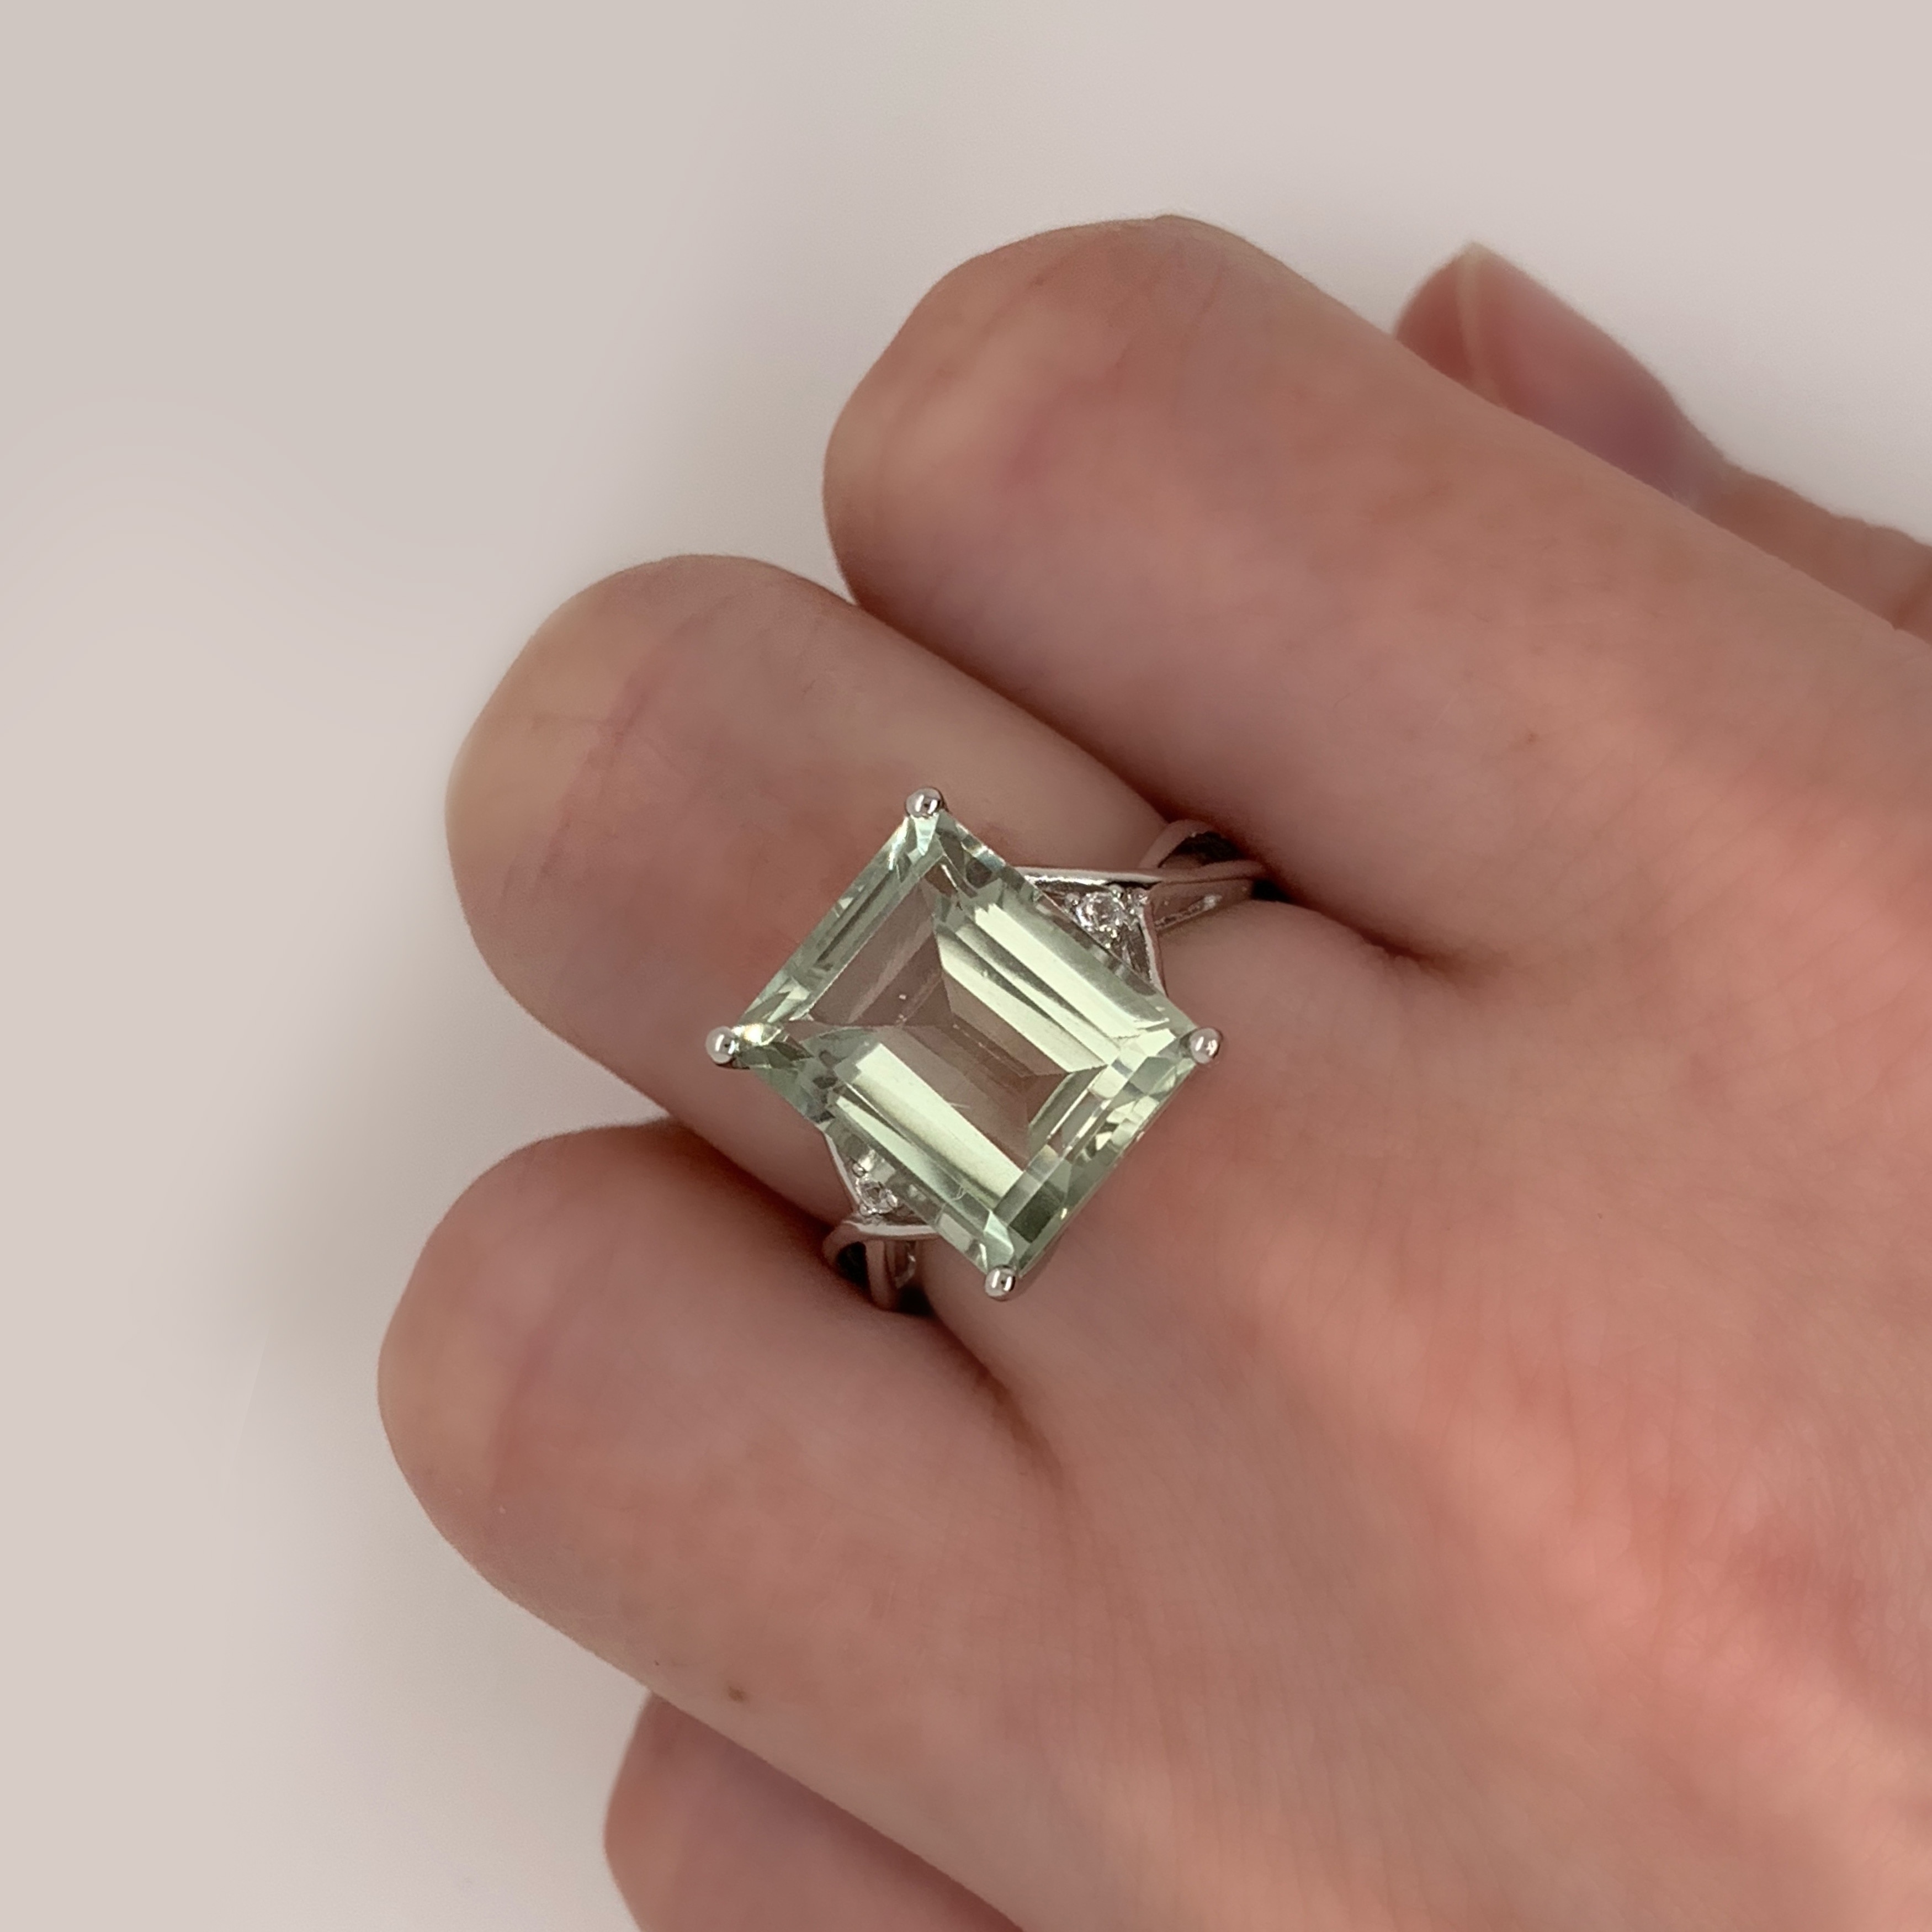 5.80 Carat Genuine Green Amethyst and White Topaz .925 Sterling Silver Ring